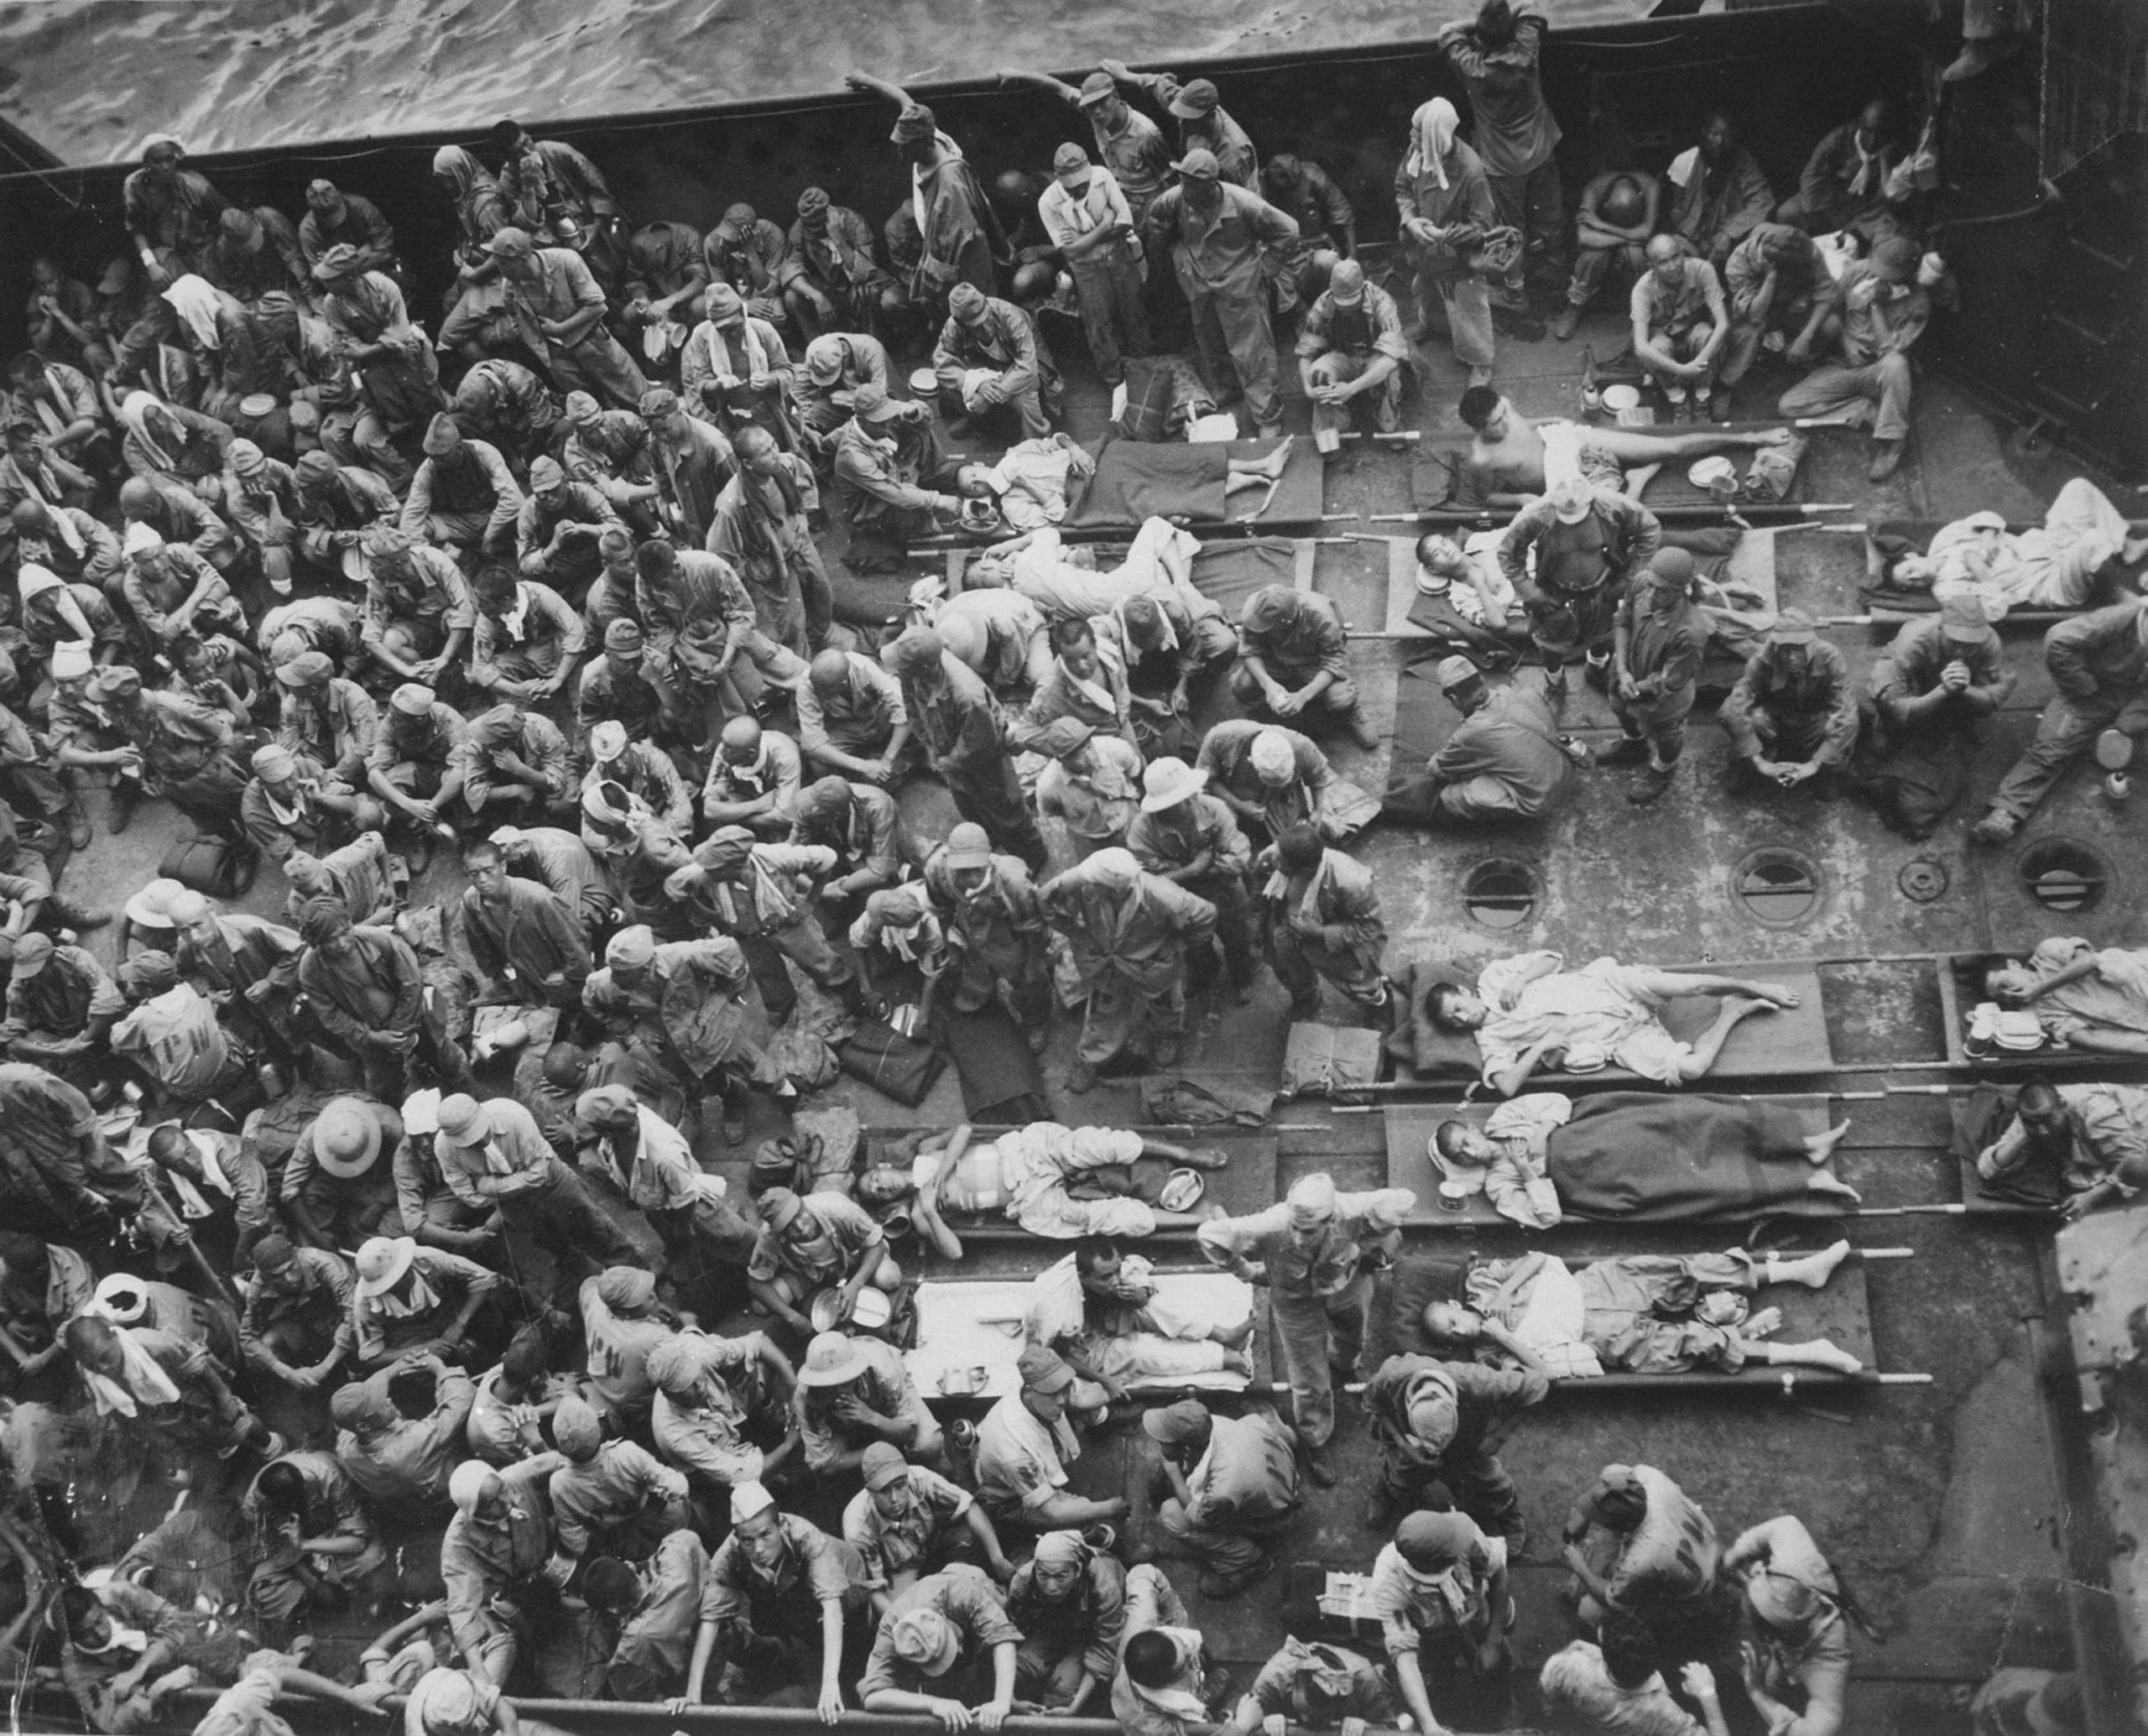 Japanese prisoners of war in the hold of a US Coast Guard transport ship